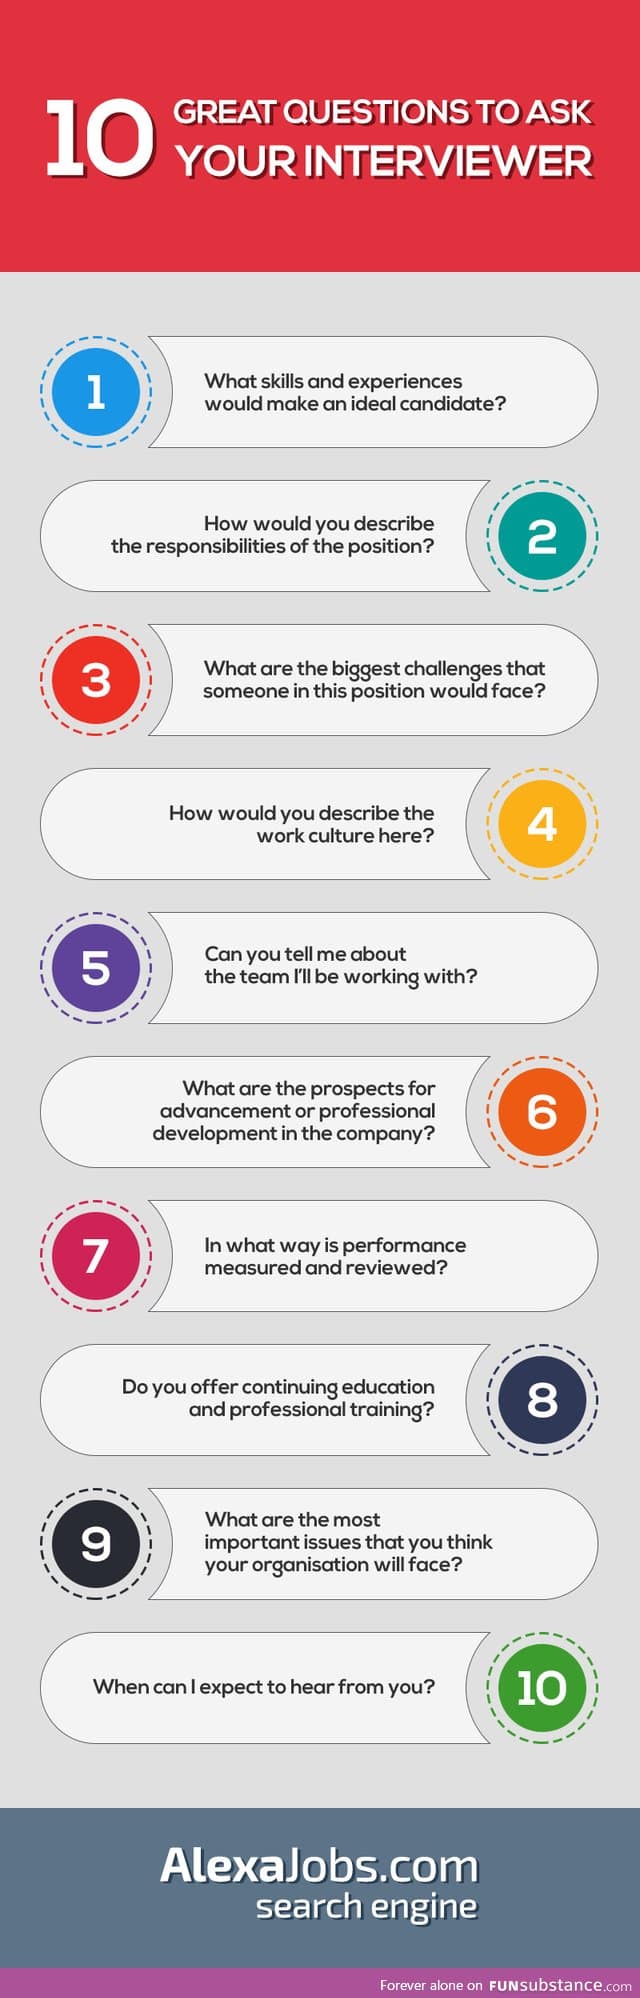 10 questions to ask your interviewer